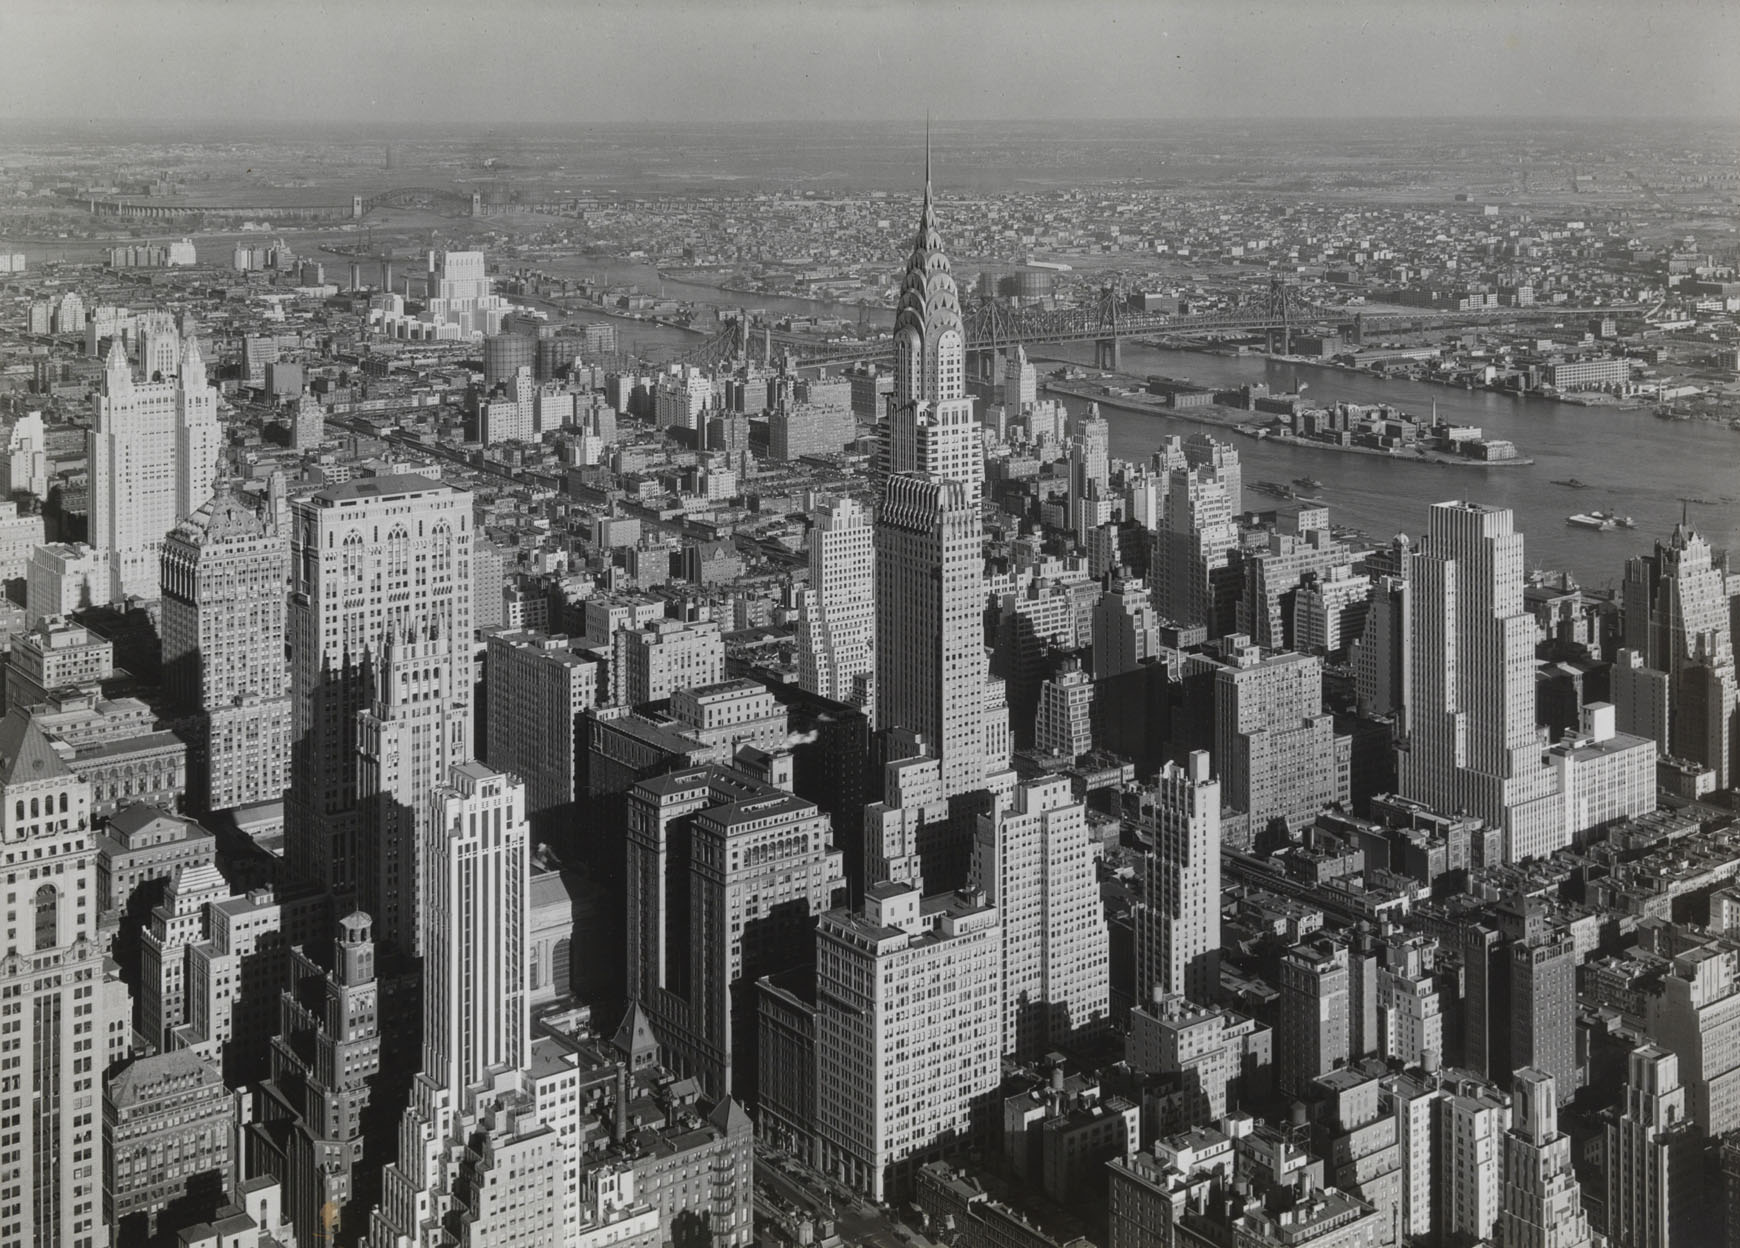 Manhattan, looking north-east, 1932 Photograph by Samuel H. Gottscho Museum of the City of New York, 39.20.2